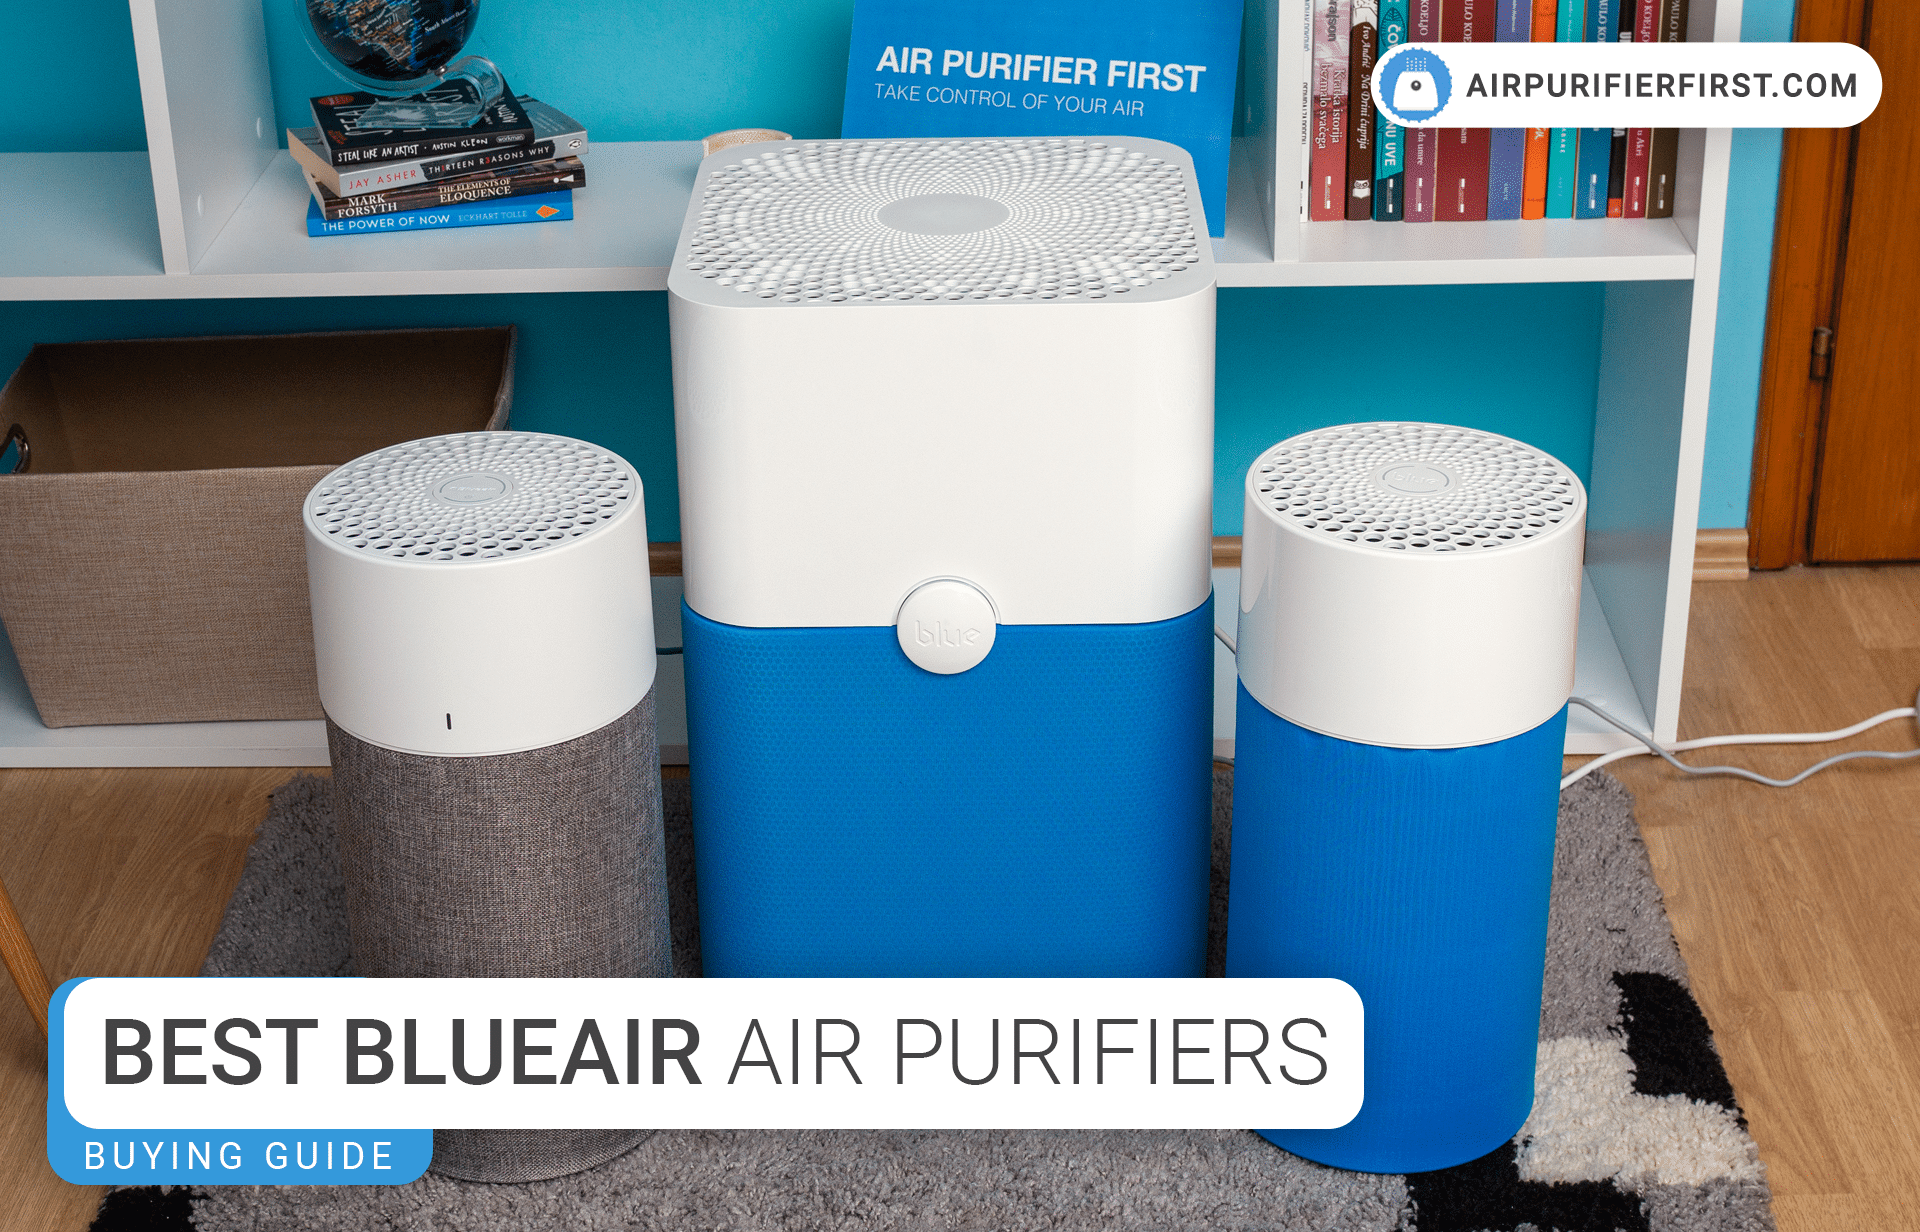 Best Blueair Air Purifiers - Reviews and Comparisons